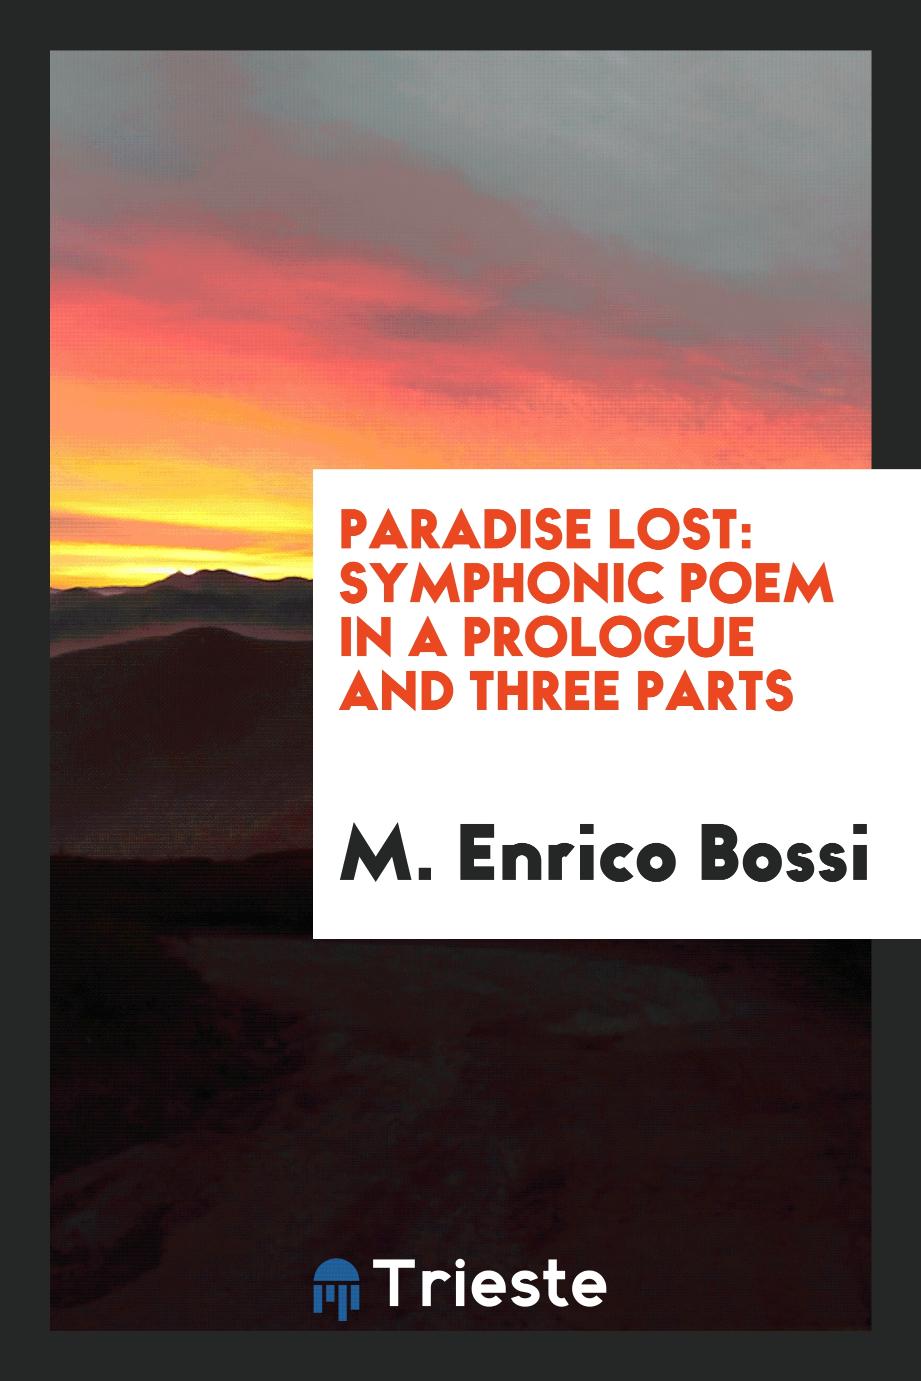 Paradise Lost: Symphonic Poem in a Prologue and Three Parts